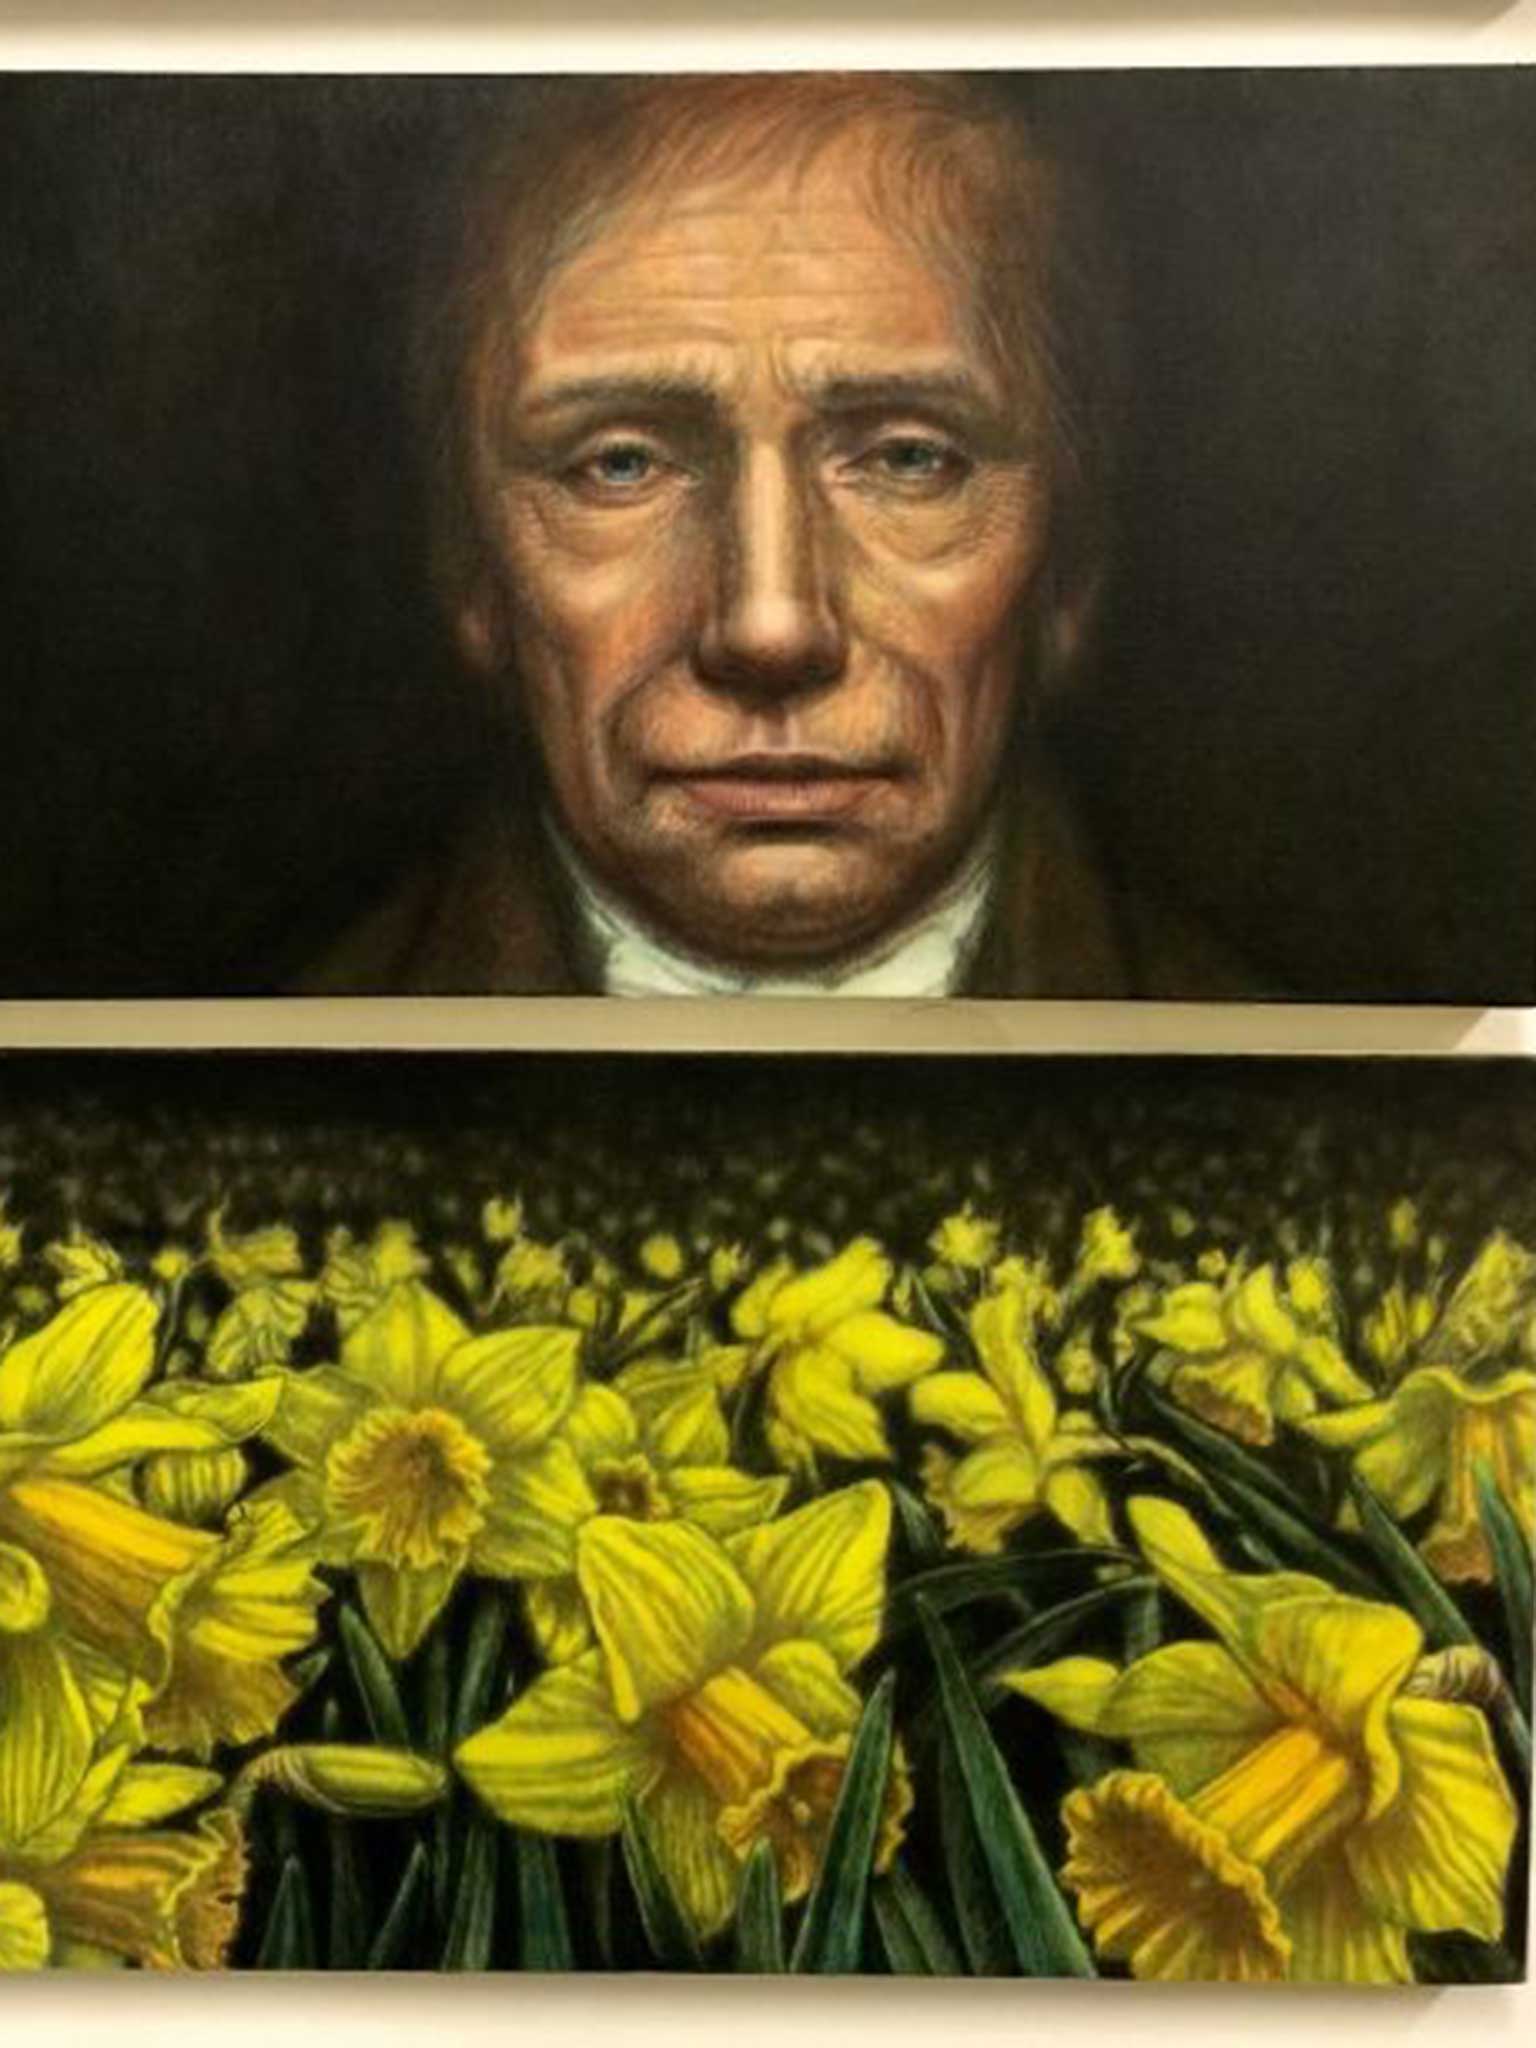 This portrait of Wordsworth by the Japanese artist Hideyuki Sobue is based on a mask of the poet’s face made in June 1815, the year that his most famous work, ‘Daffodils’, was published